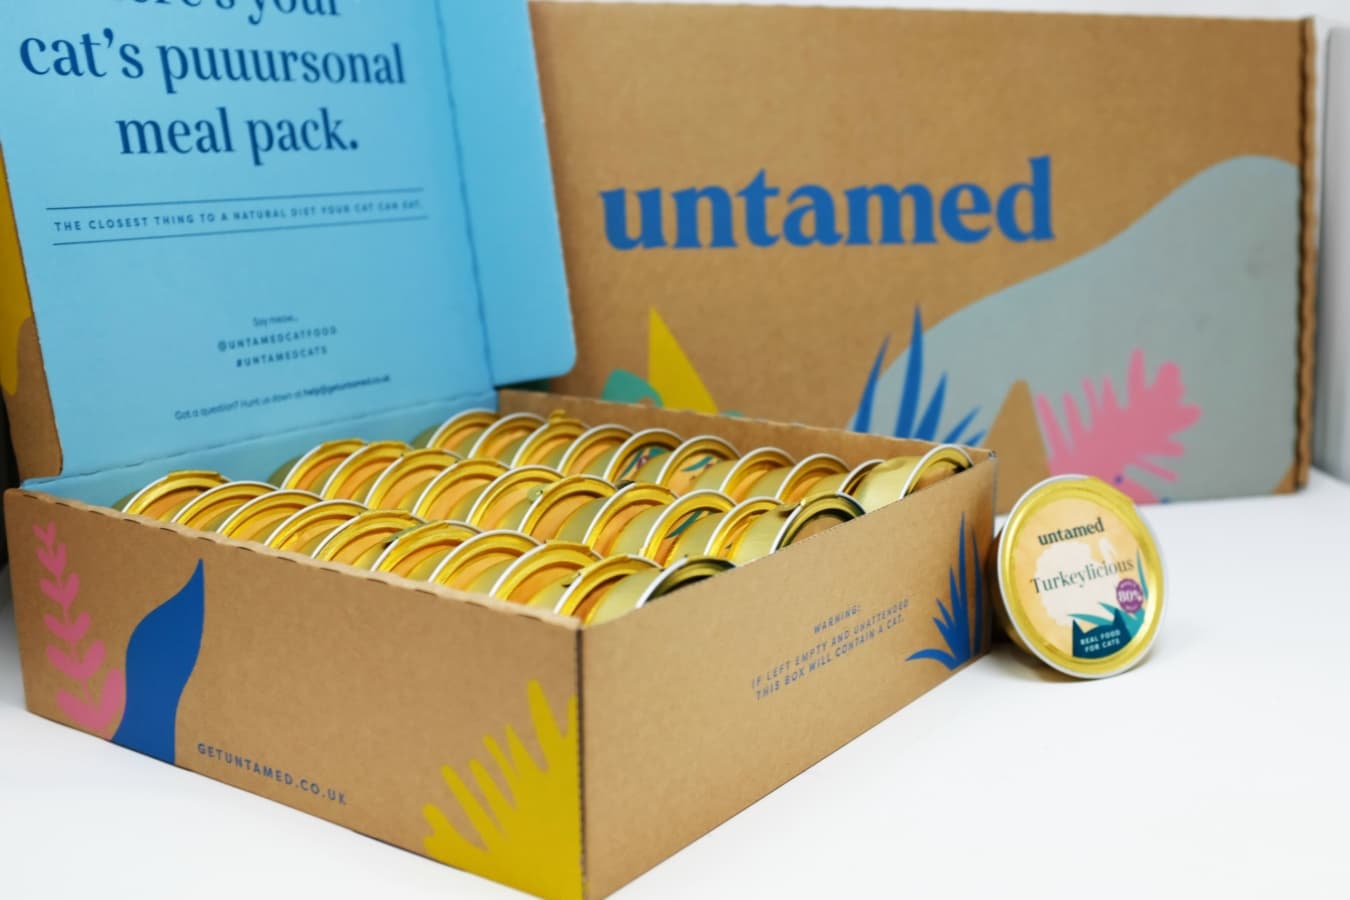 Subscription box packaging: A guide to choosing the right box.